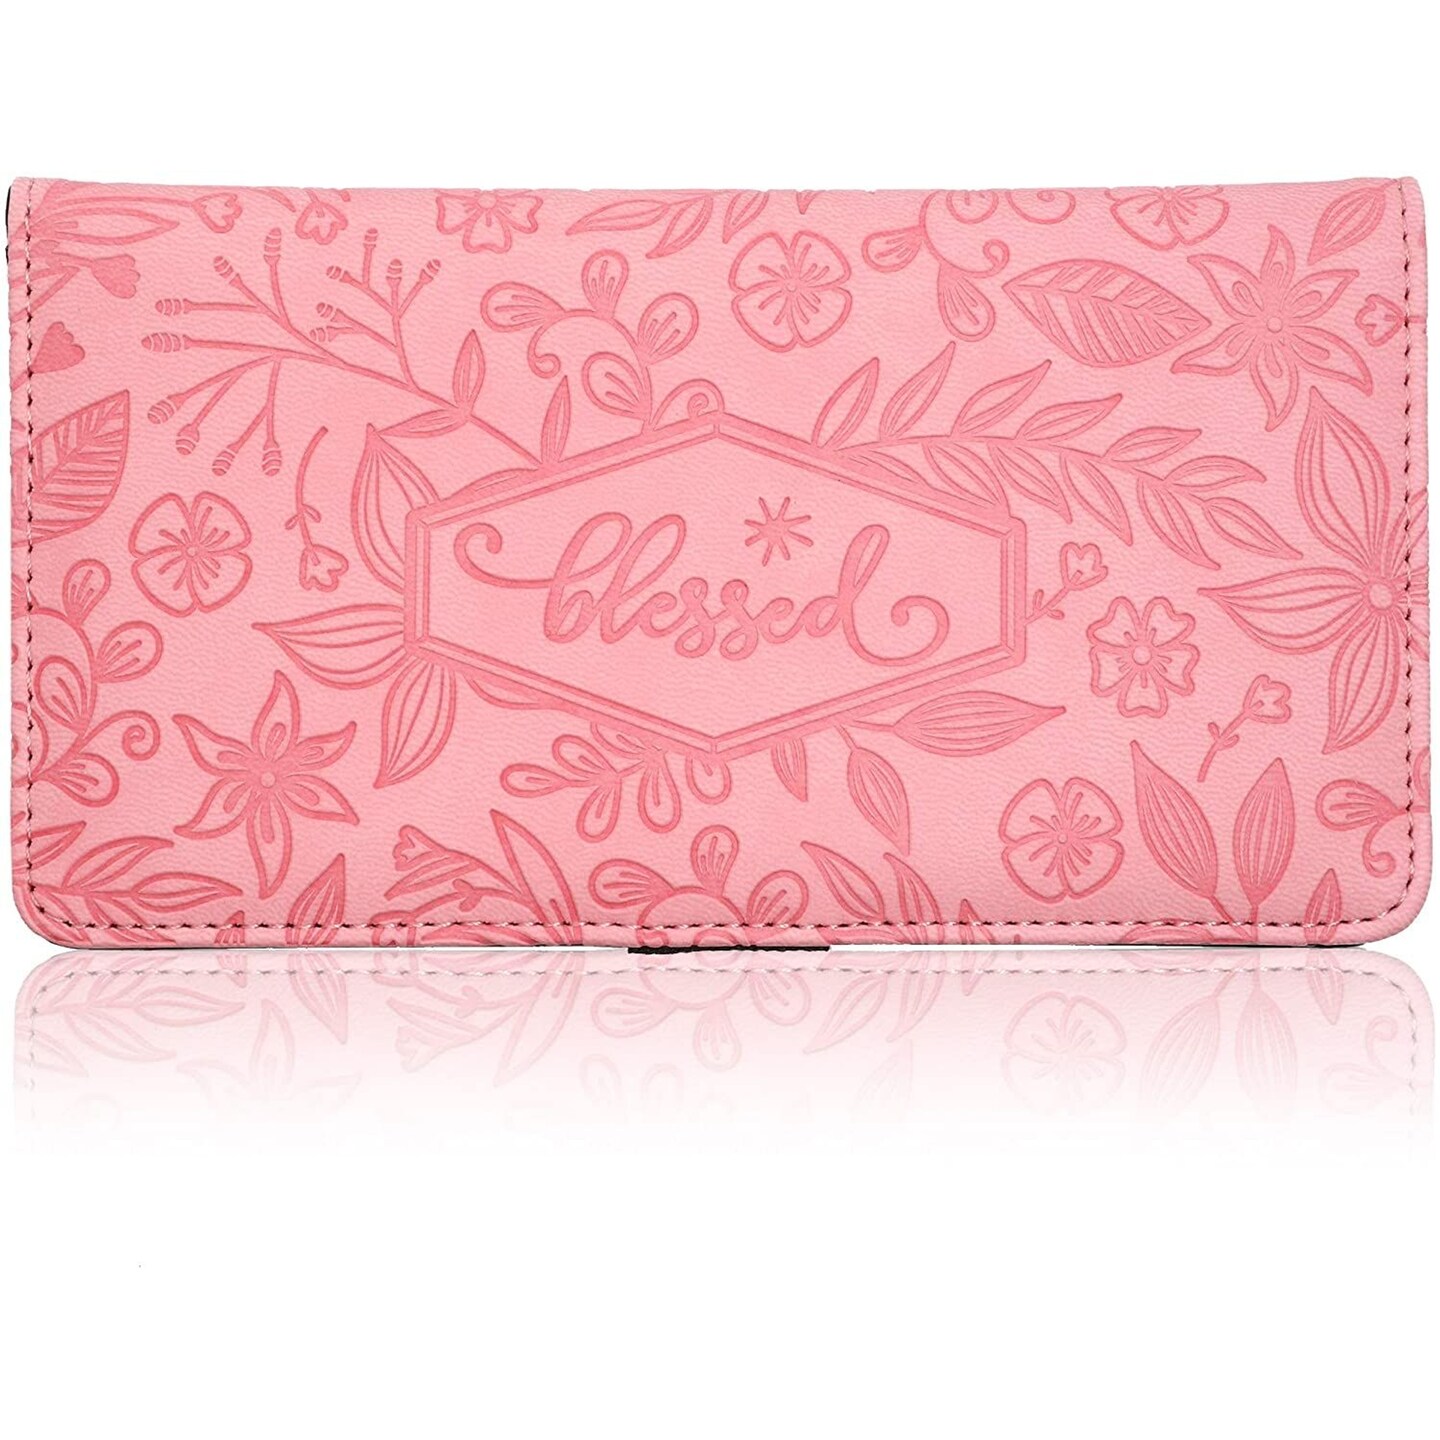 Floral Checkbook Cover for Women Card Holder Wallet for Checks &#x26; Credit Cards, RFID Blocking (Pink)